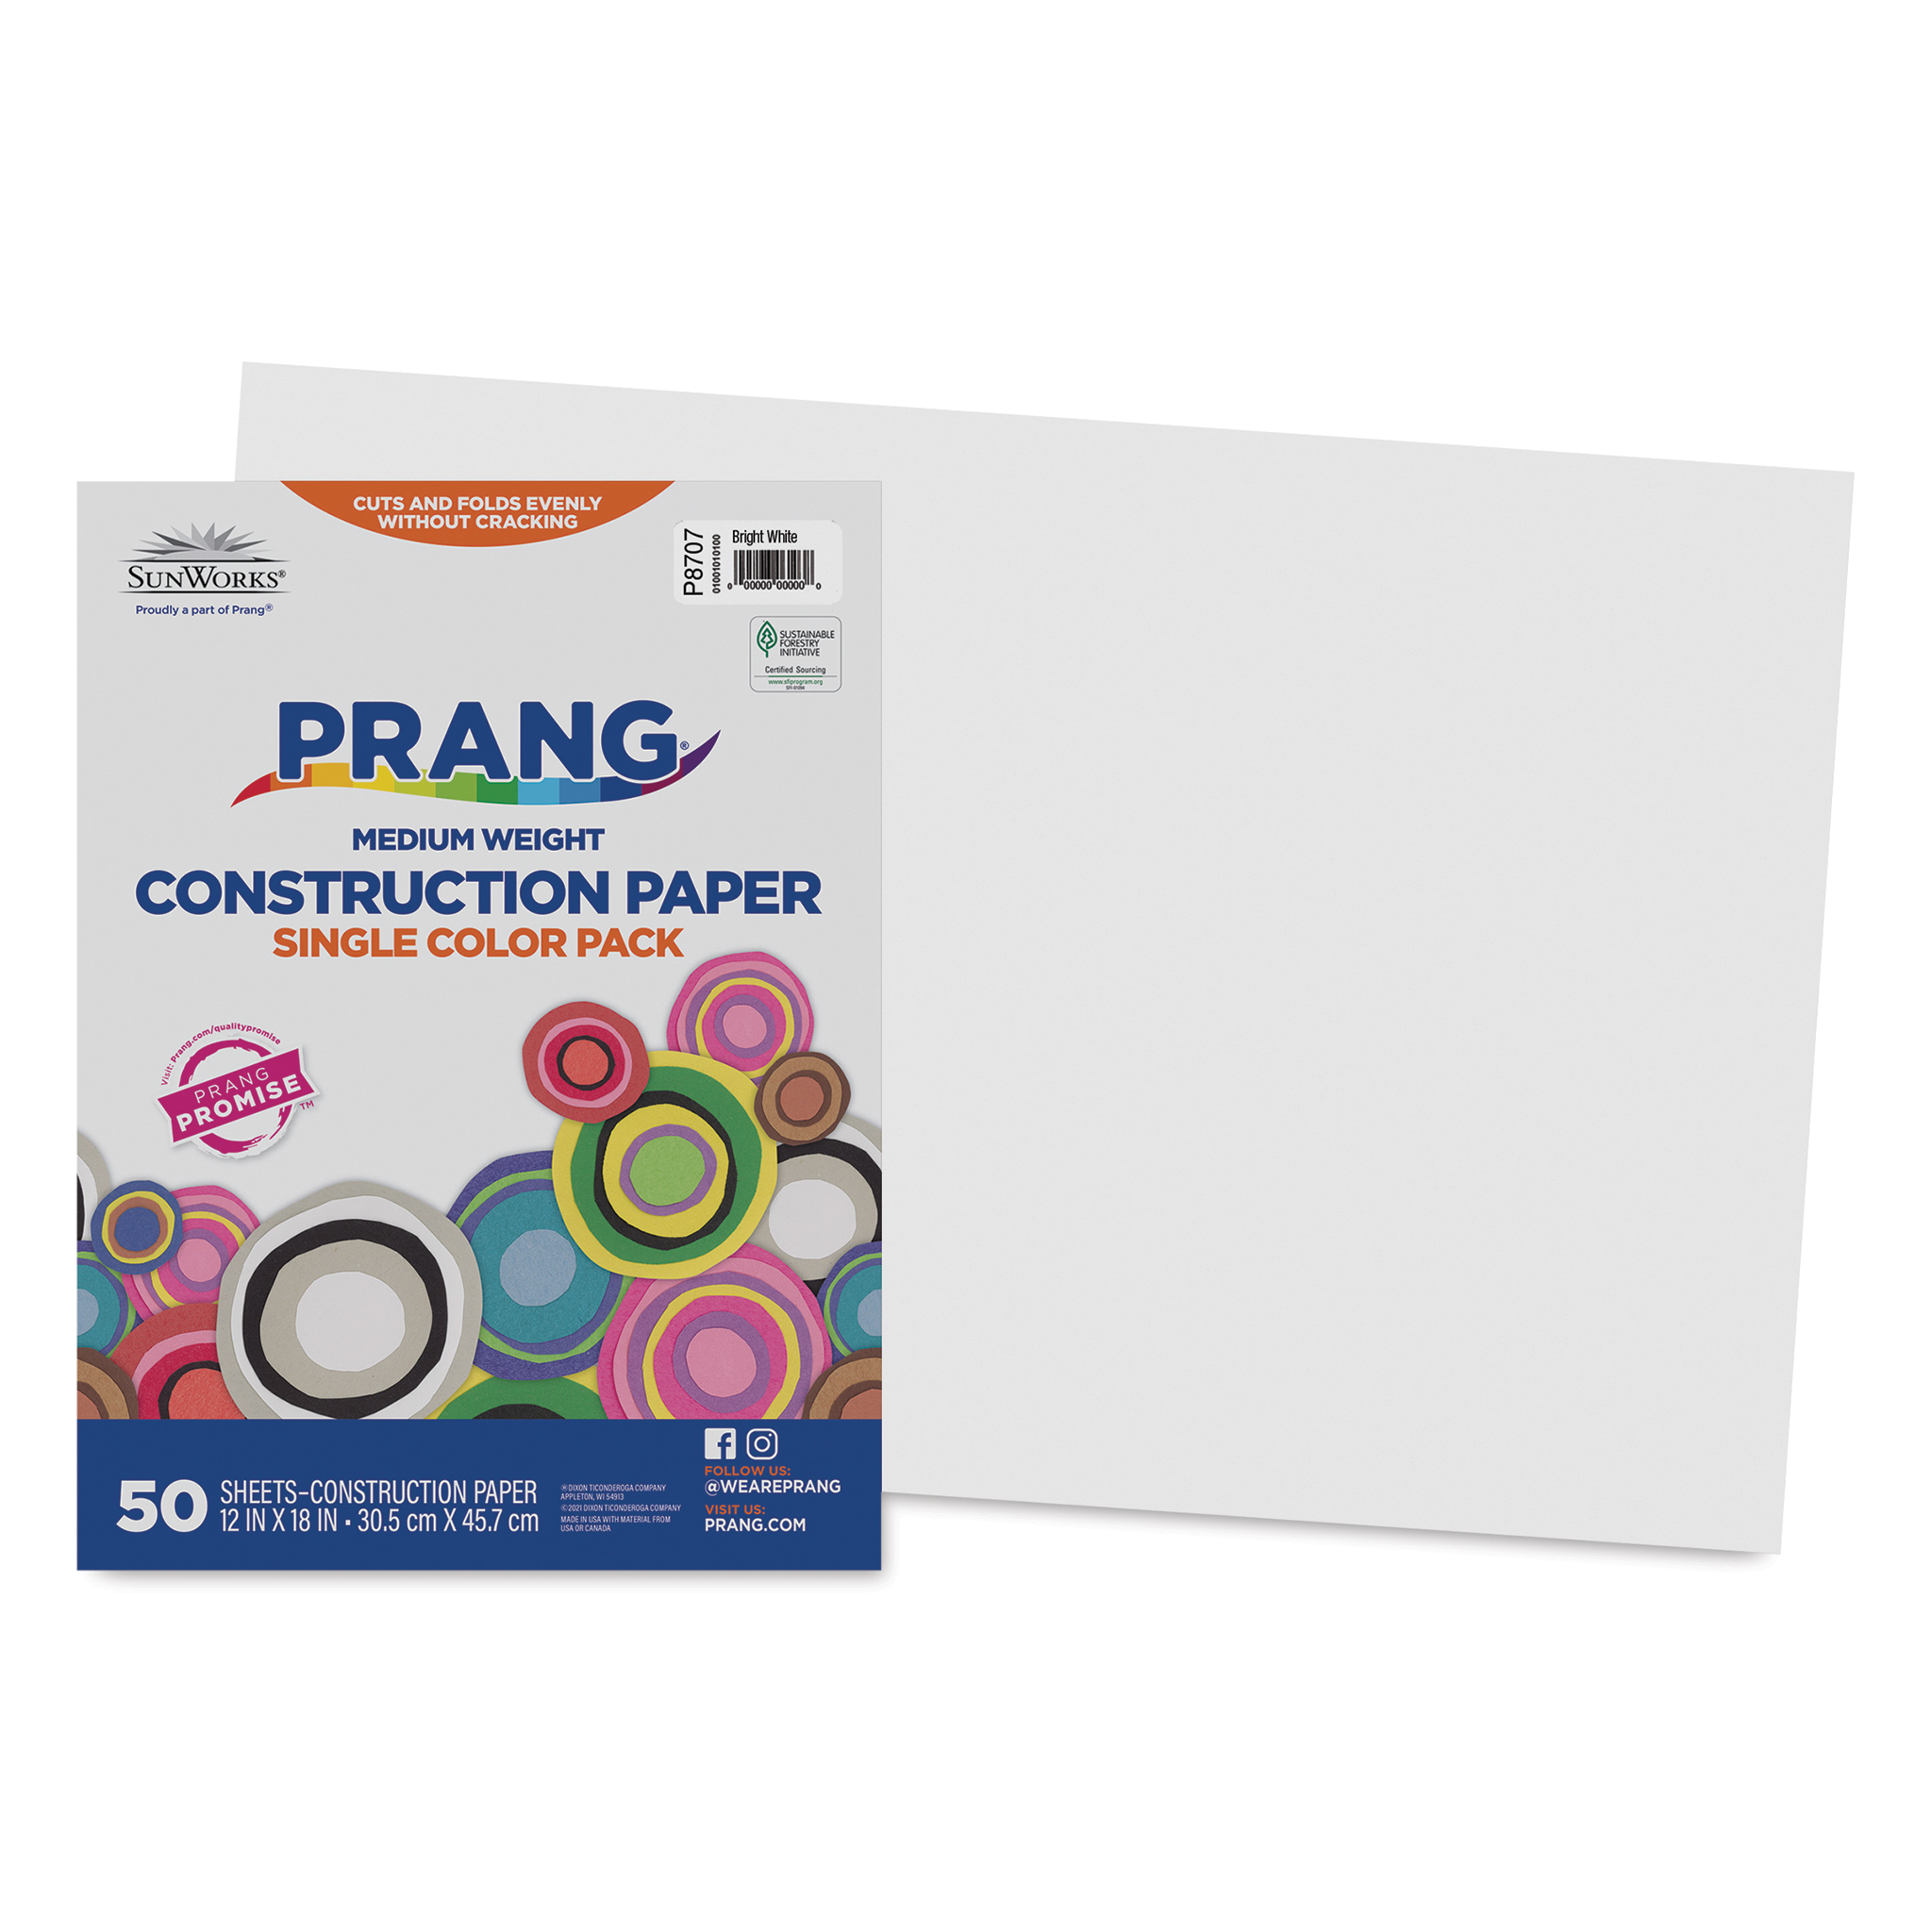 Pacon Construction Paper, Bright White, 12 x 18 - 50 pack